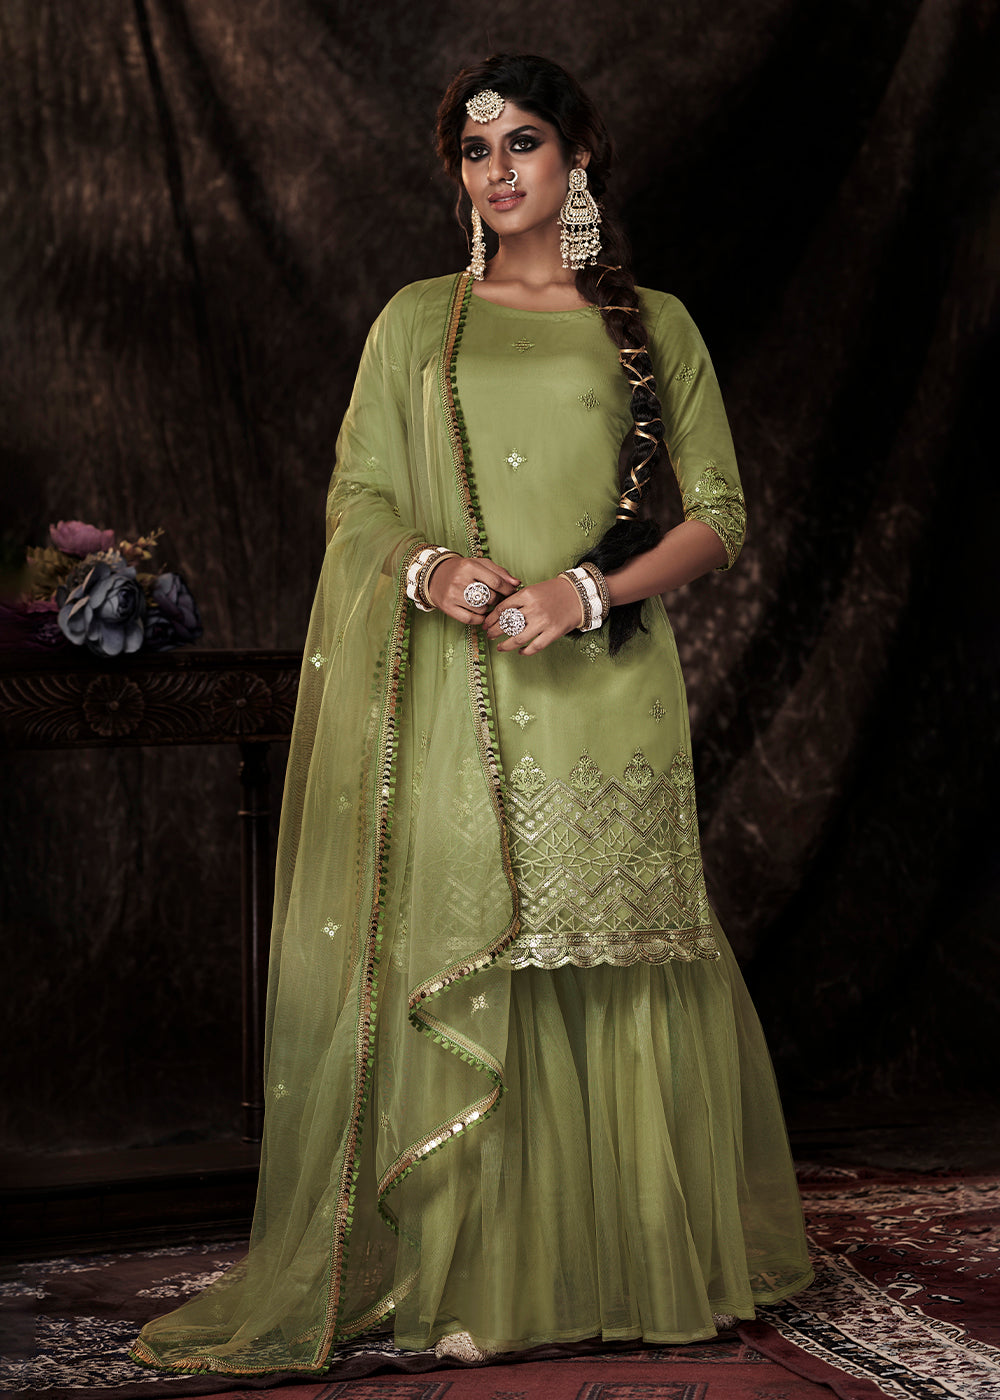 Pistachio Green Designer Soft Net Sharara Suit with Sequin work By Qivii